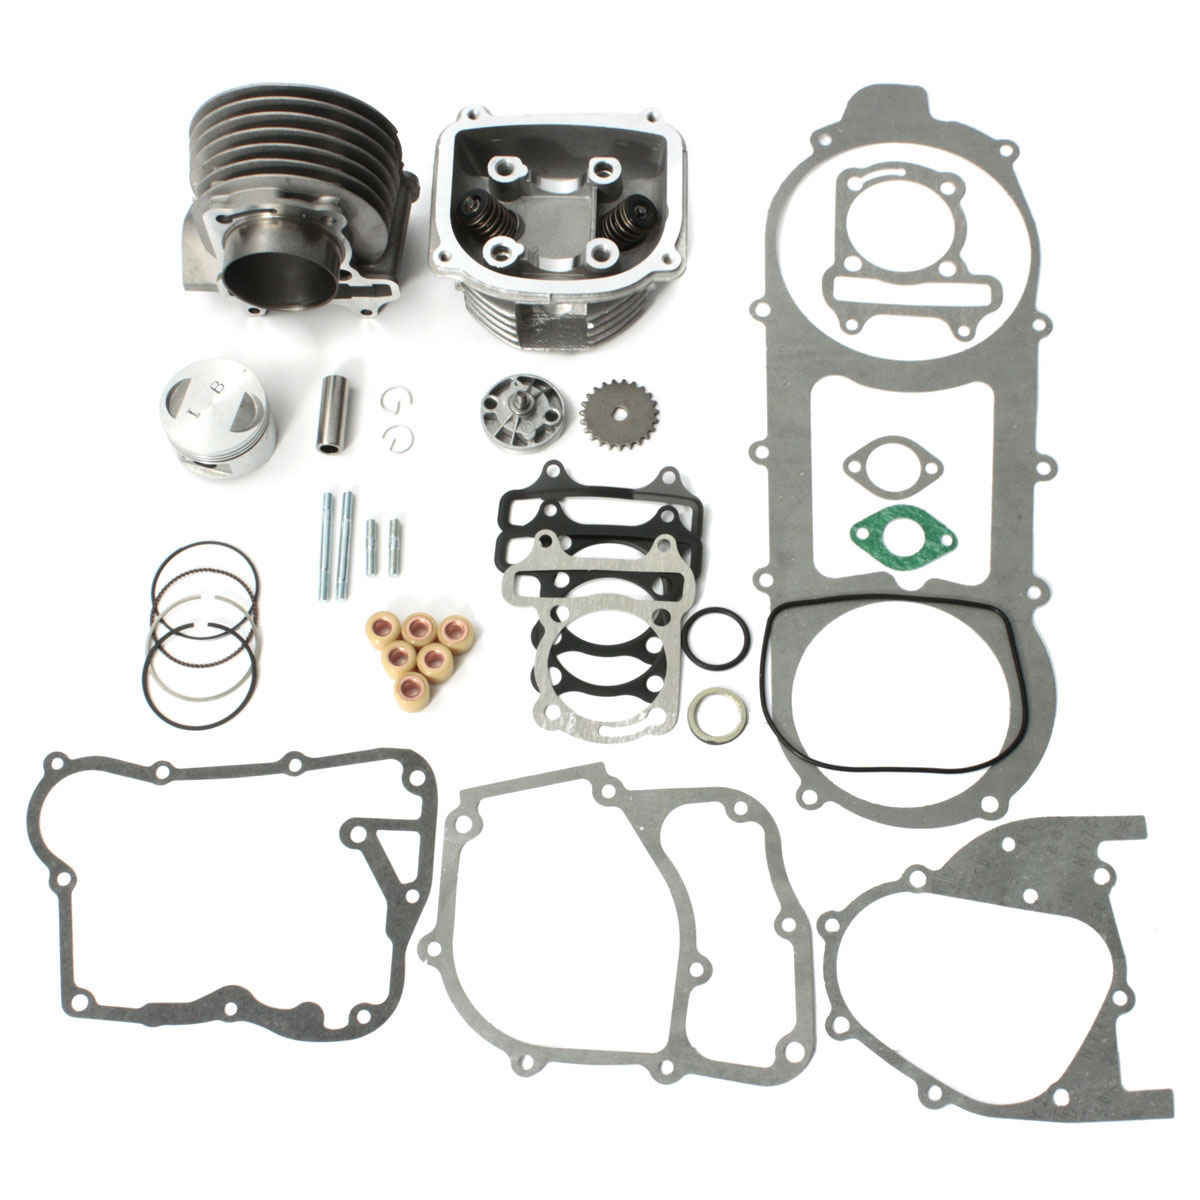 57mm Bore Cylinder Engine Rebuild Kit For 150cc Gy6 Chinese Scooter Parts